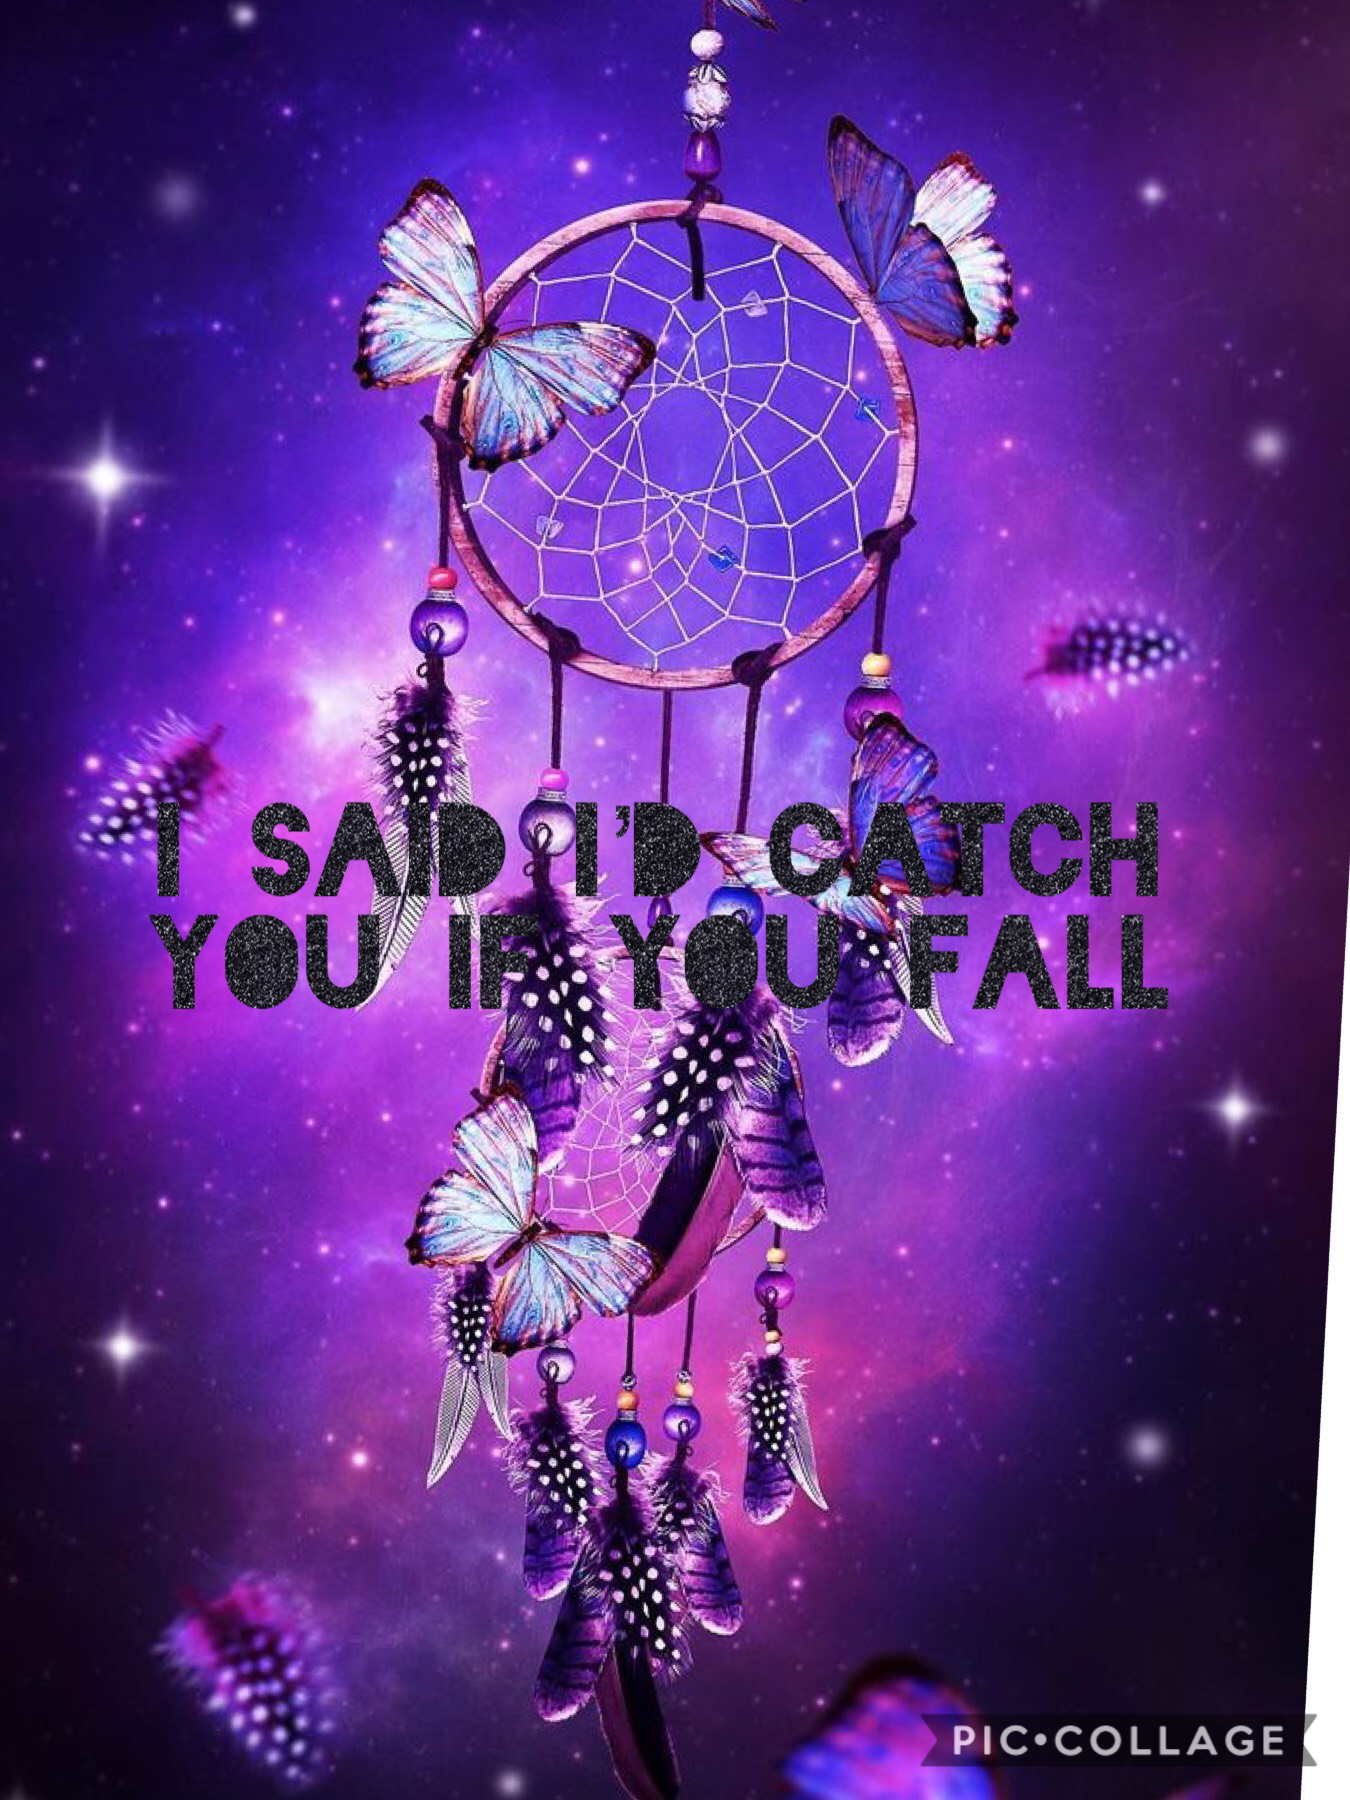 If you get it comment if you don’t ask me what the dream catcher is for